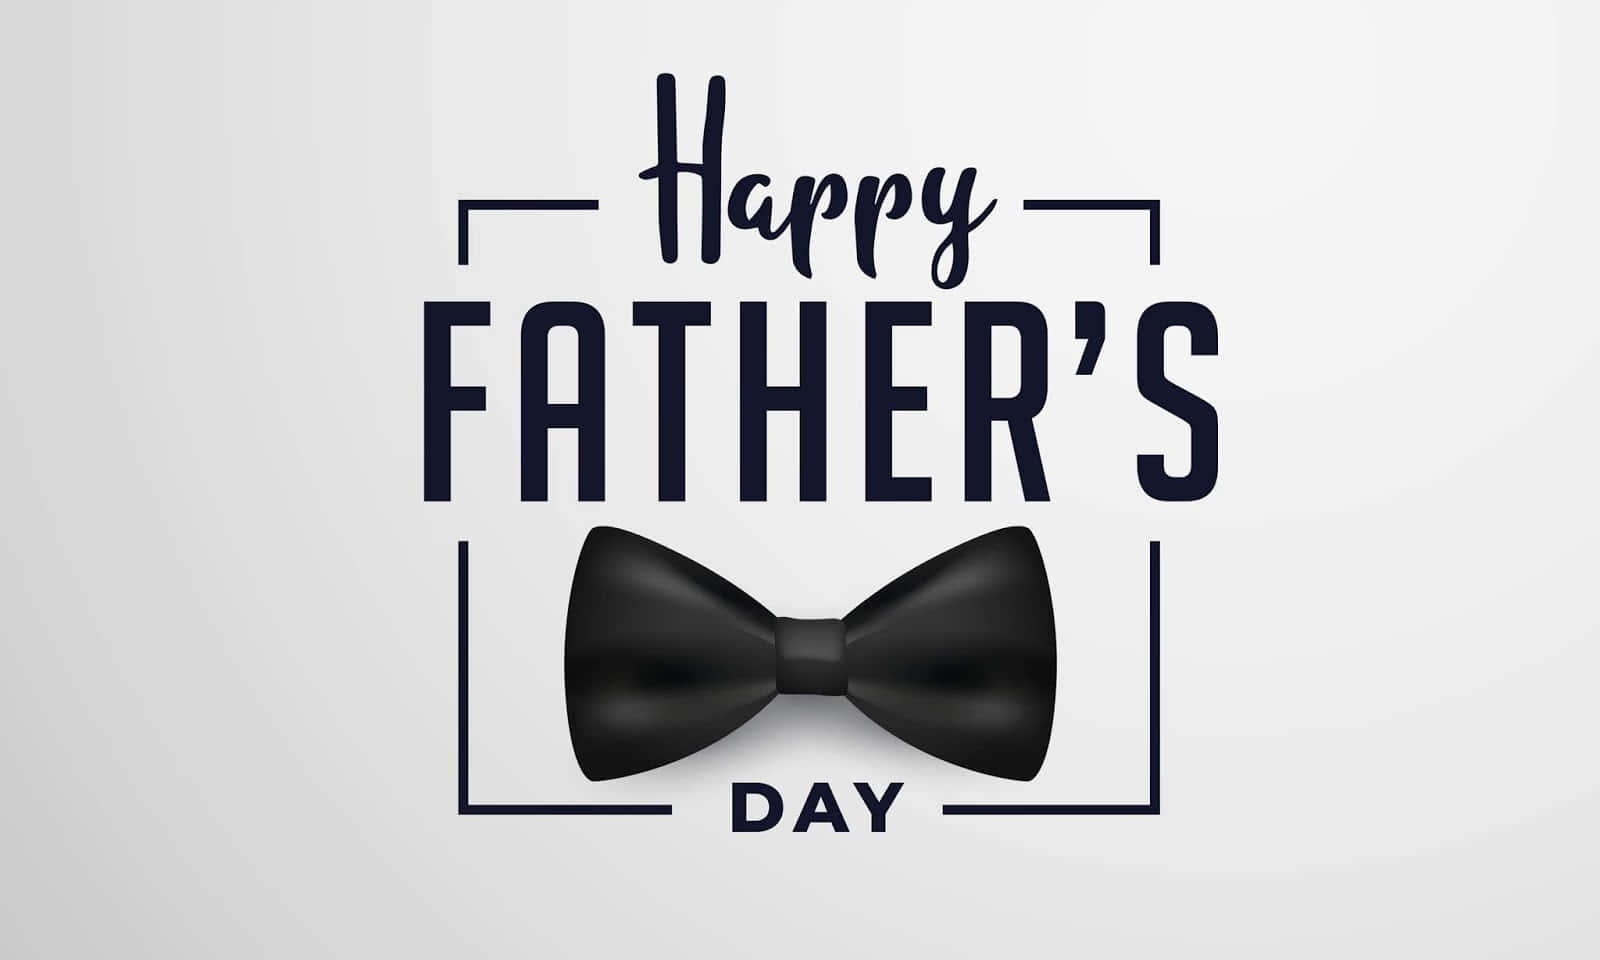 Celebrate Father's Day during this special time